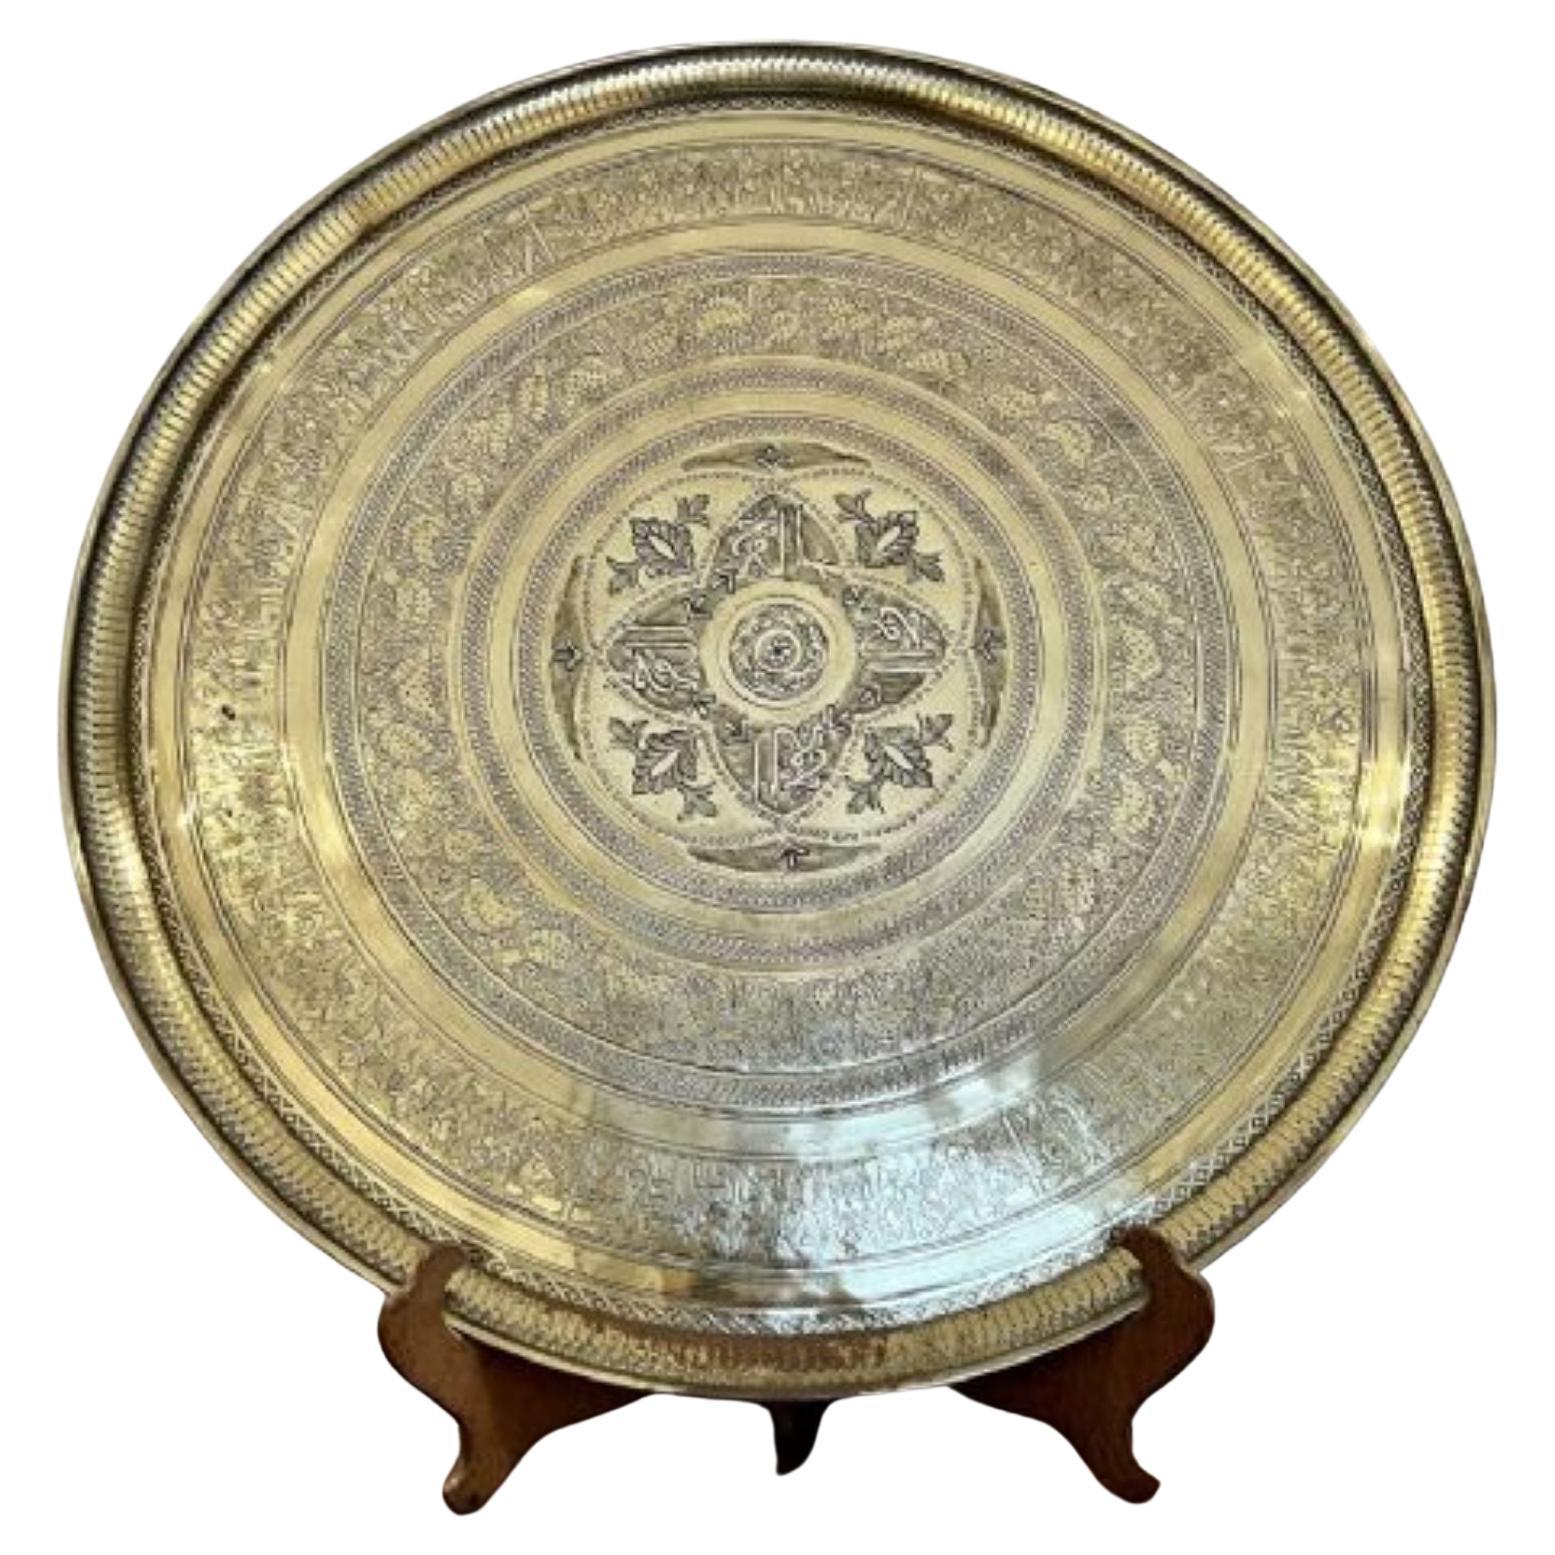 https://a.1stdibscdn.com/large-antique-victorian-quality-engraved-circular-mixed-metal-tray-for-sale/f_92142/f_364839121696594144875/f_36483912_1696594145382_bg_processed.jpg